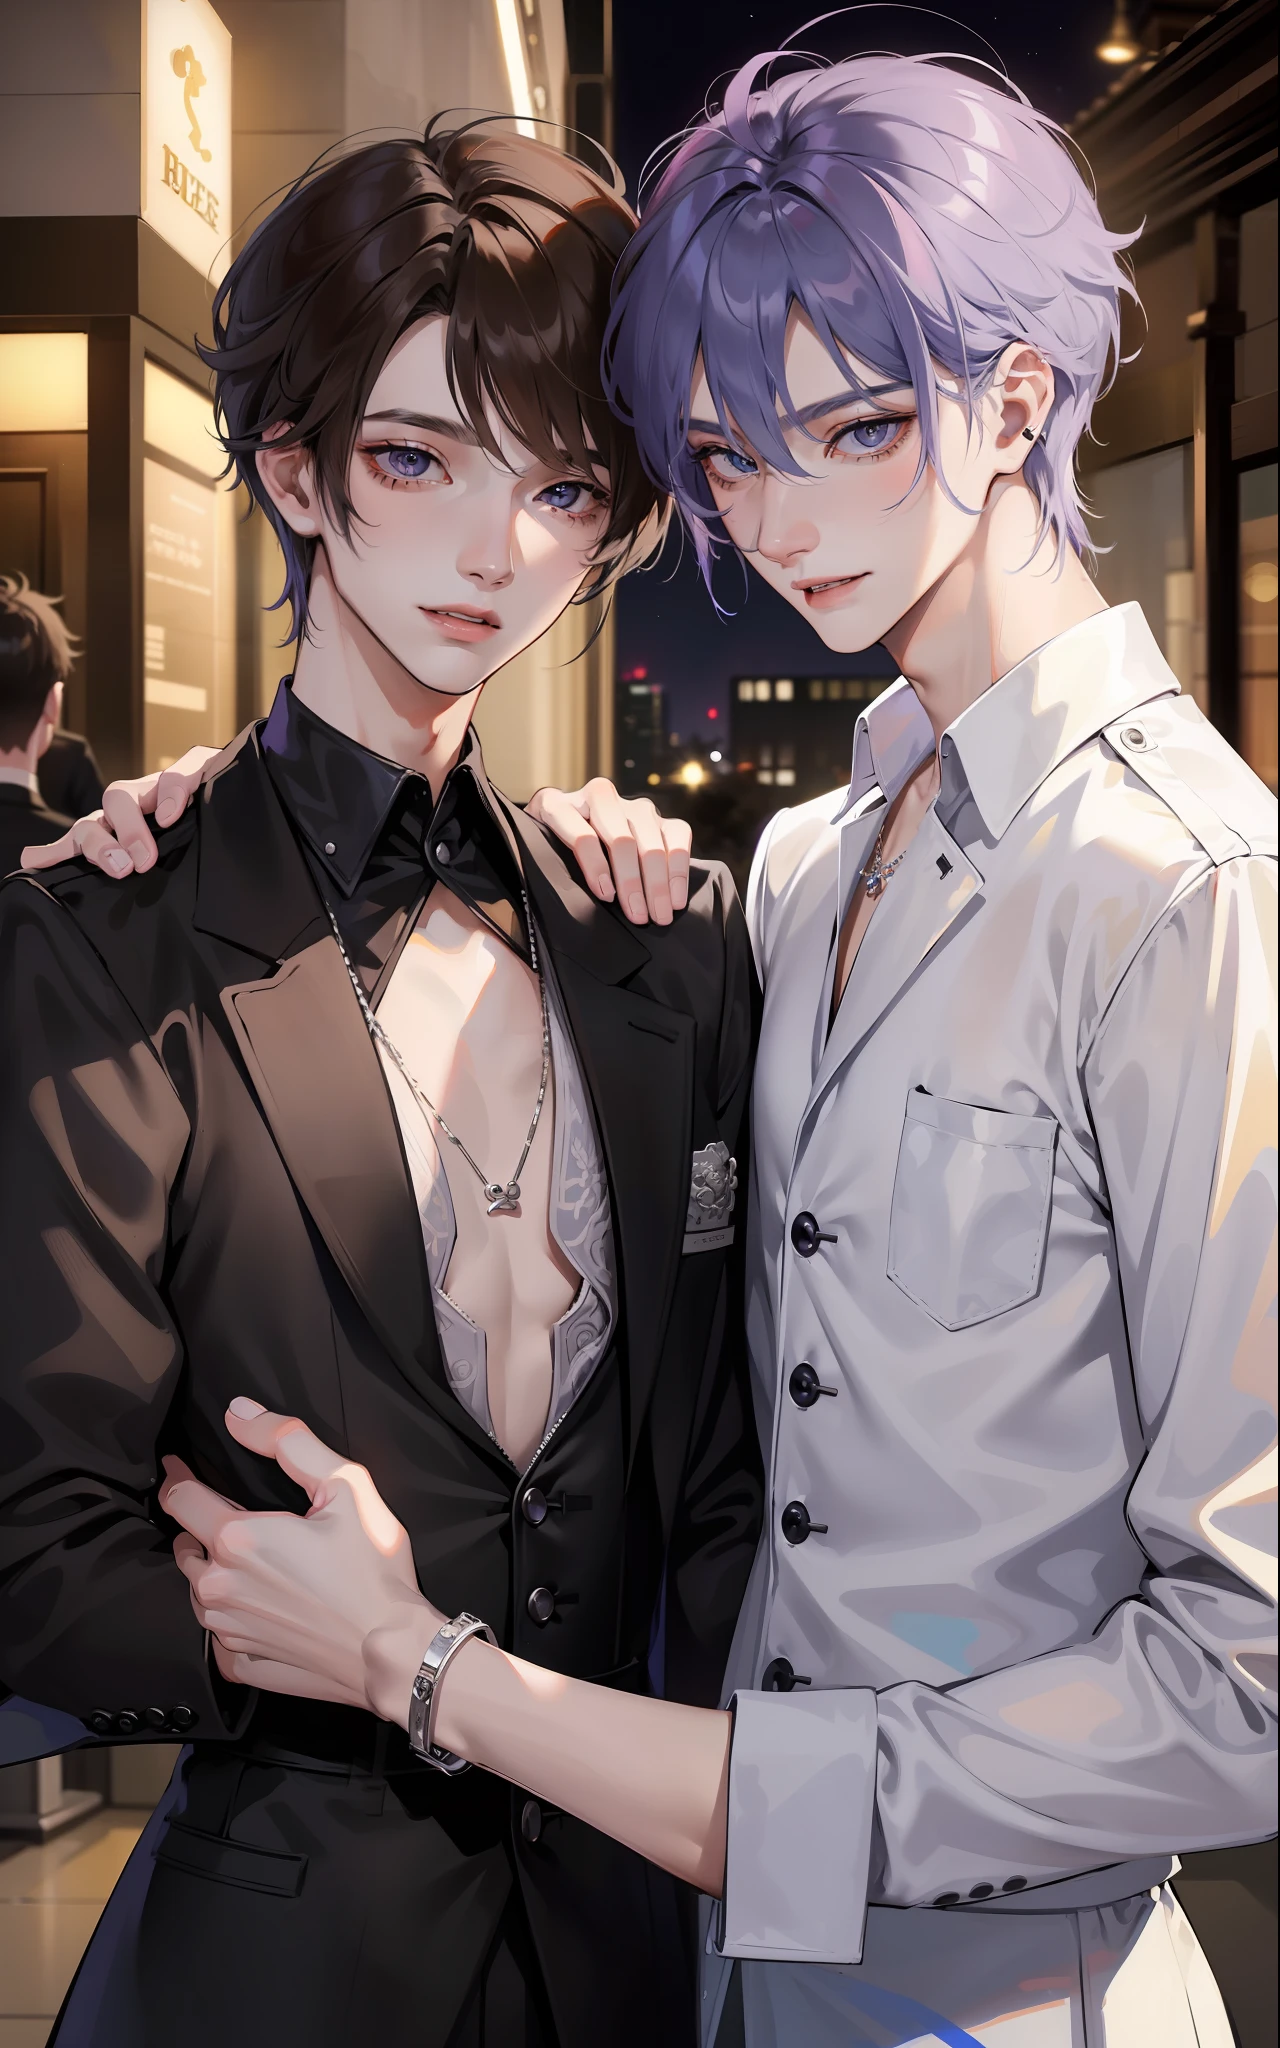 ​masterpiece, top-quality, 2Others, Male couple, 1 man and 1,, Adults, Height difference, different fashion, different color, finely eye and detailed face, intricate detailes, Black Butler Fashion, Modern urban streets, A smile, Happiness, tenderness, queers, Boys Love, high-level image quality、 Two beautiful men、tall、The upper part of the body、nightfall、nighttime scene、𝓡𝓸𝓶𝓪𝓷𝓽𝓲𝓬、Korean Male, k pop, Professional Photos, Vampires, Fedoman with necklace, inspired by Sim Sa-jeong, androgynous vampire, :9 detailed face: 8, extra detailed face, detailed punk hair, ((eyes are brown)) baggy eyes, Seductive. Highly detailed, semi realistic anime, Vampire deacon, hyperrealistic teen, delicate androgynous prince, imvu, short hair above the ears, Man with short hair, With a purple-haired man with a wild expression, Man with light blue hair with gentle expression, With a short-haired man with bright purple hair, Man with light blue hair, Take a selfie for two